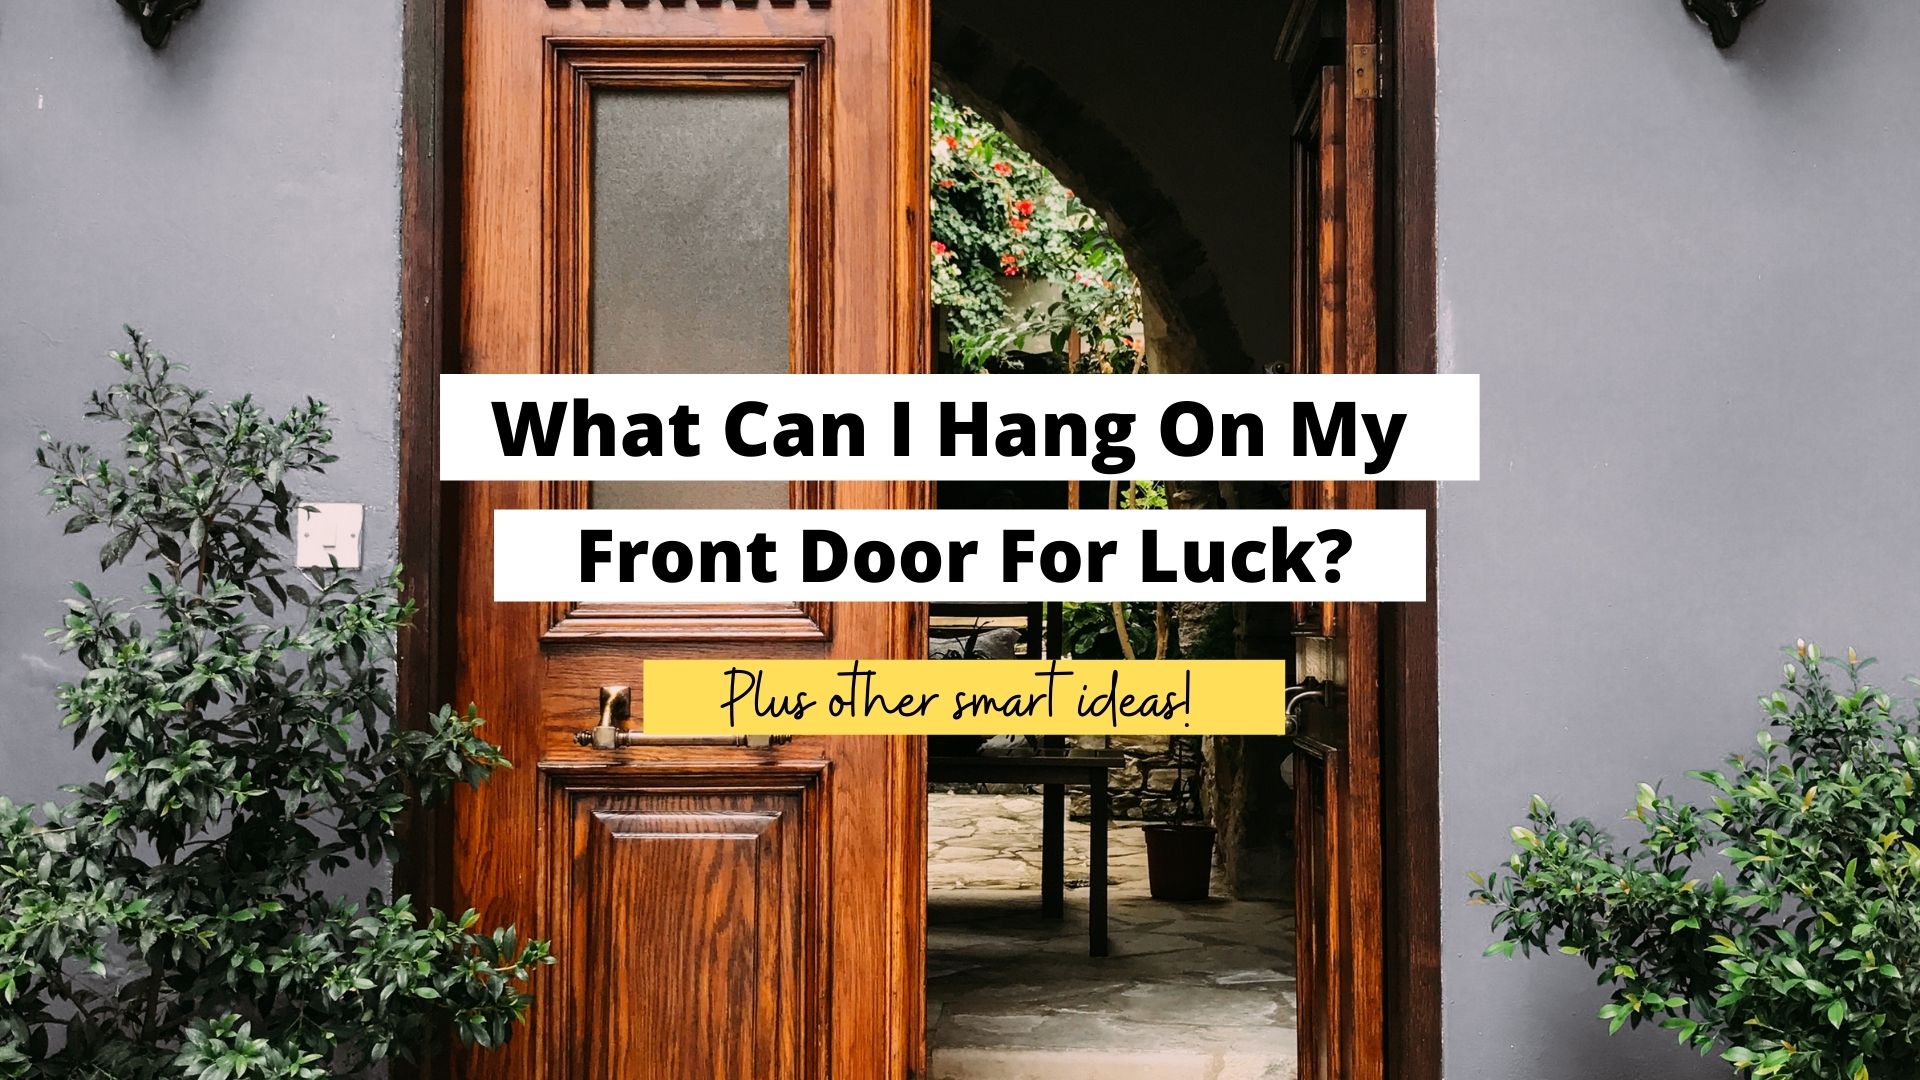 what should I hang on my front door for luck